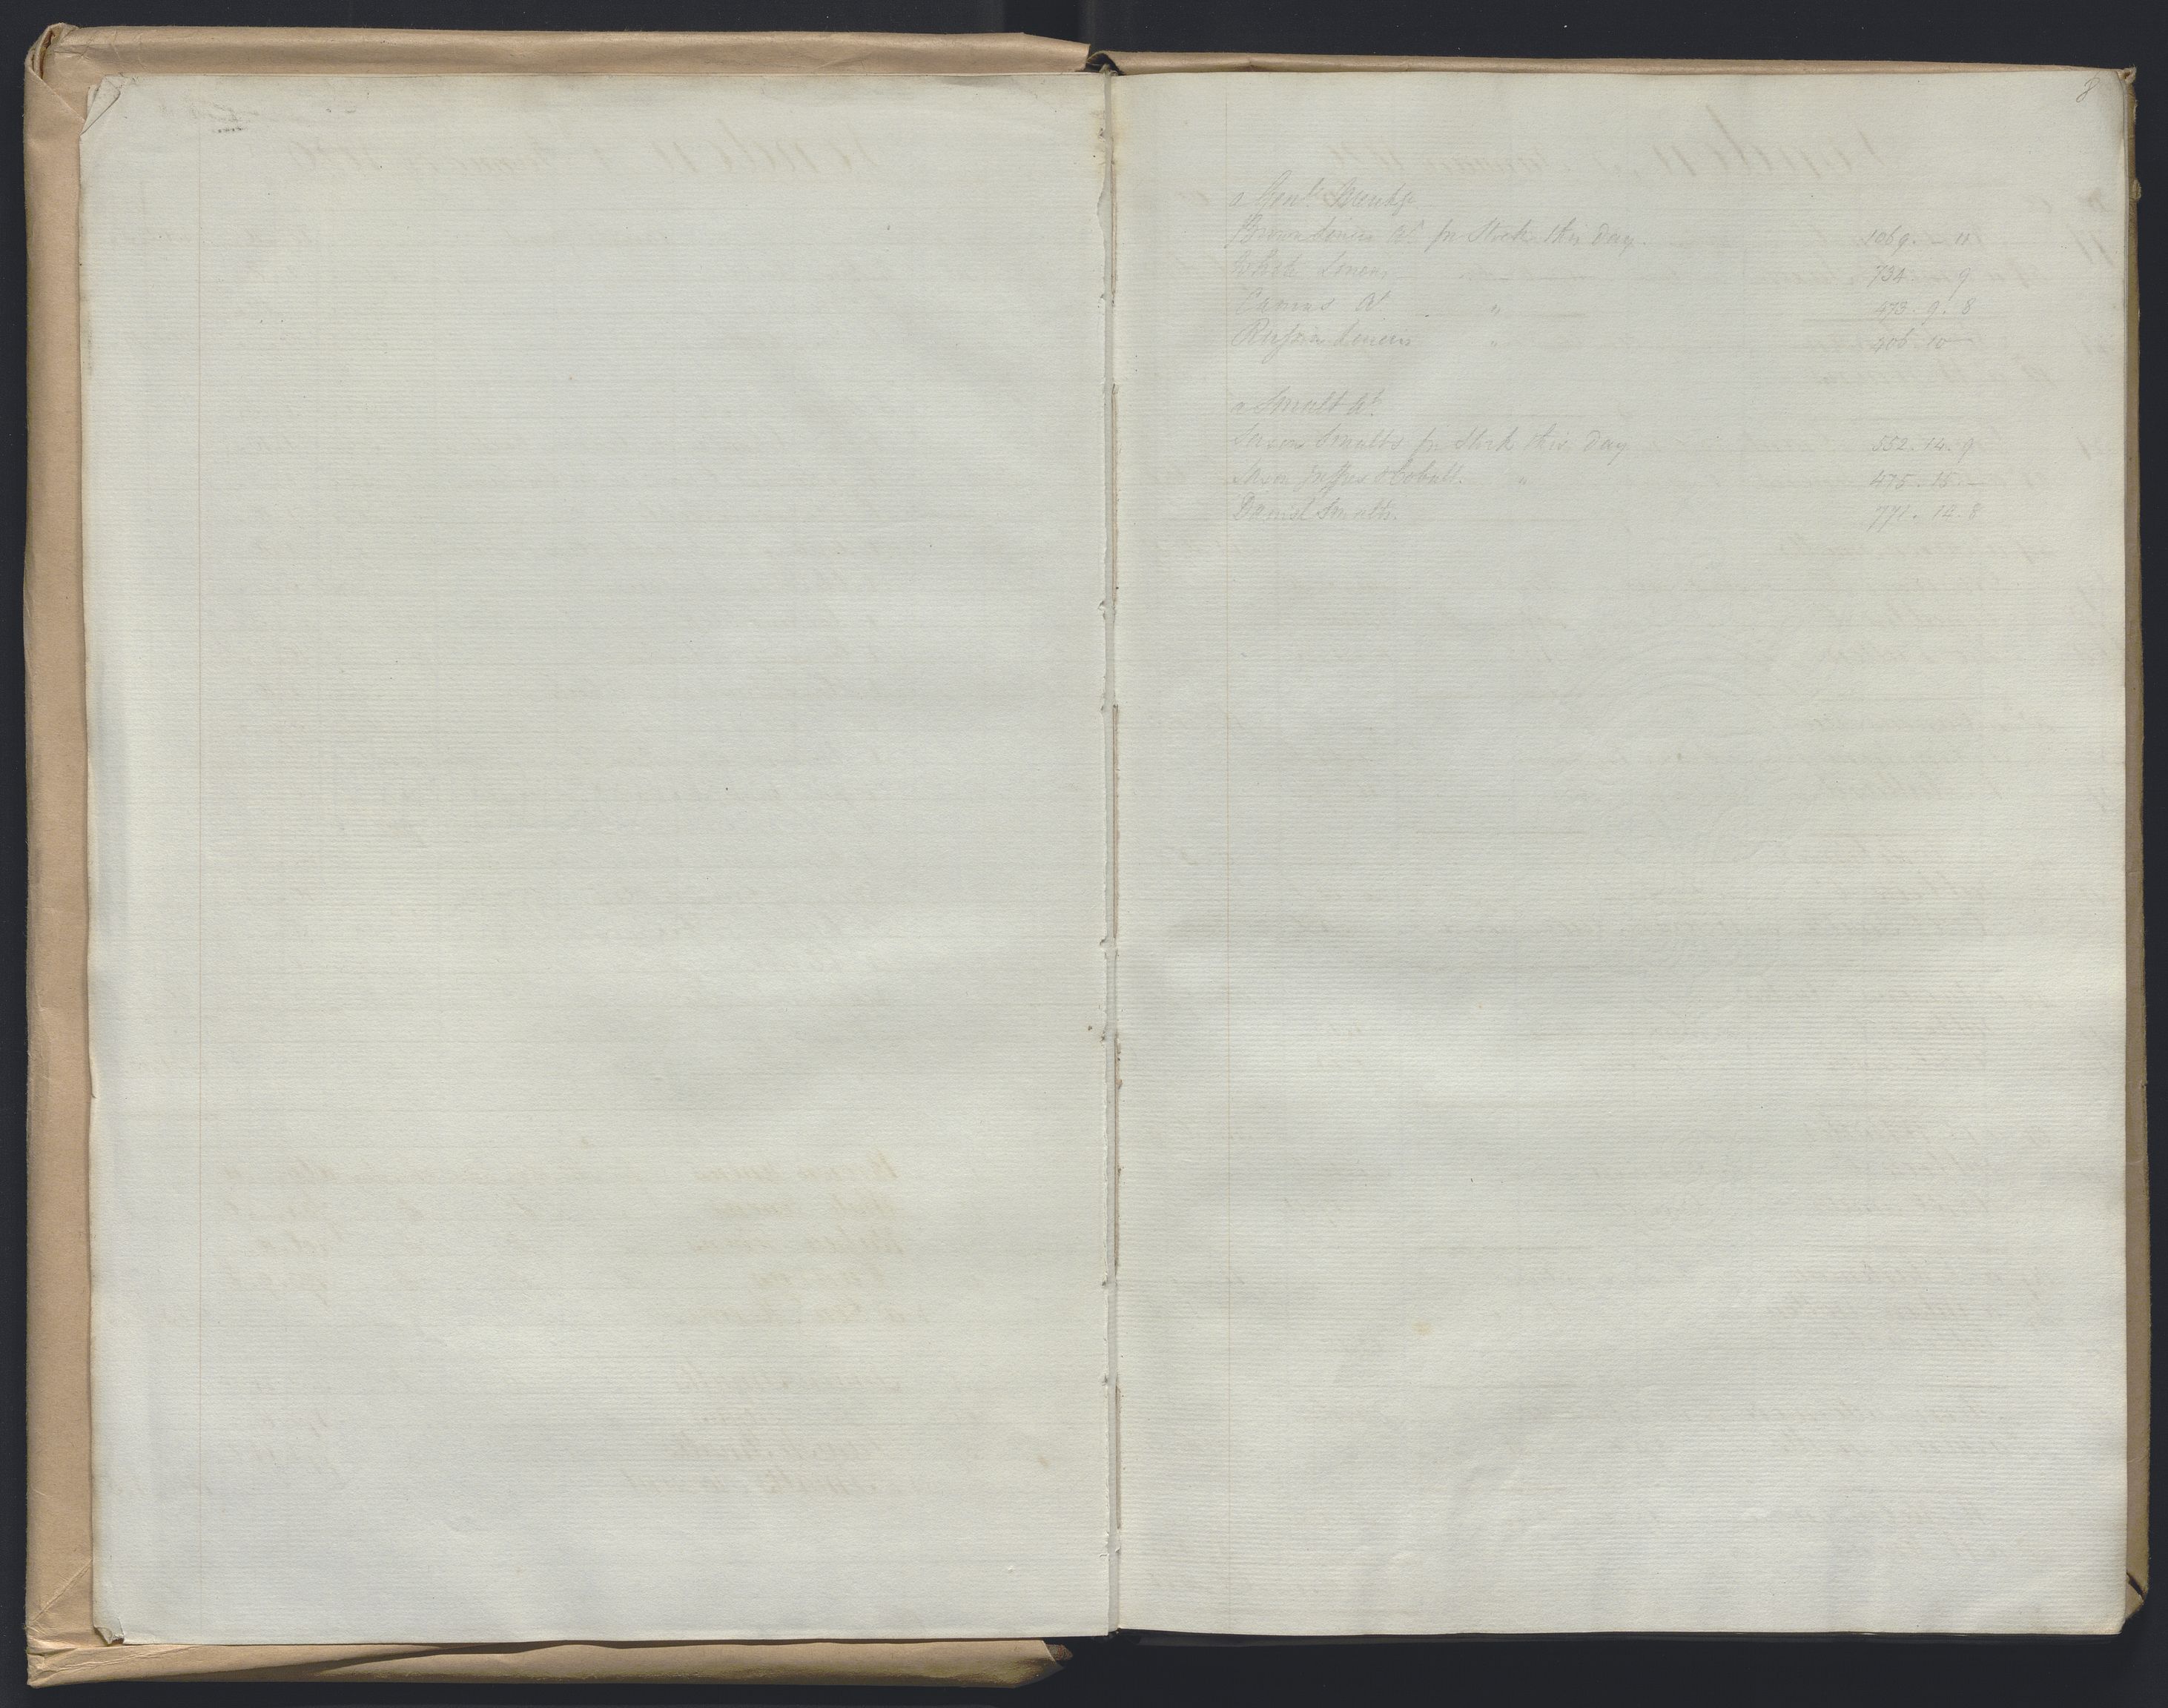 Smith, Goodhall & Reeves, RA/PA-0586/R/L0001: Dagbok (Daybook) A, 1829-1831, p. 5-8